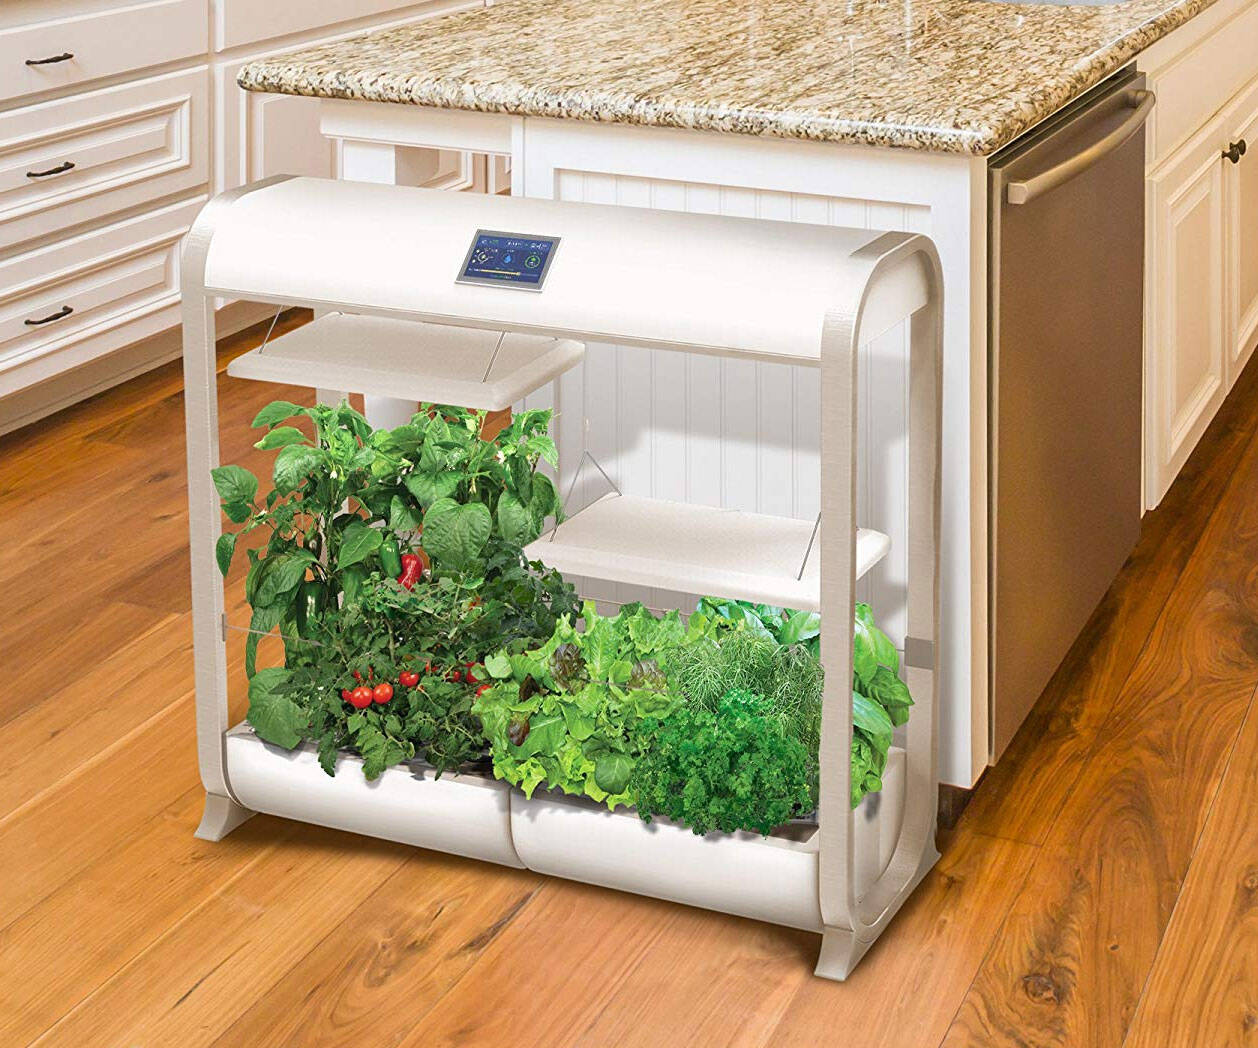 Farm Plus Hydroponic Garden - coolthings.us